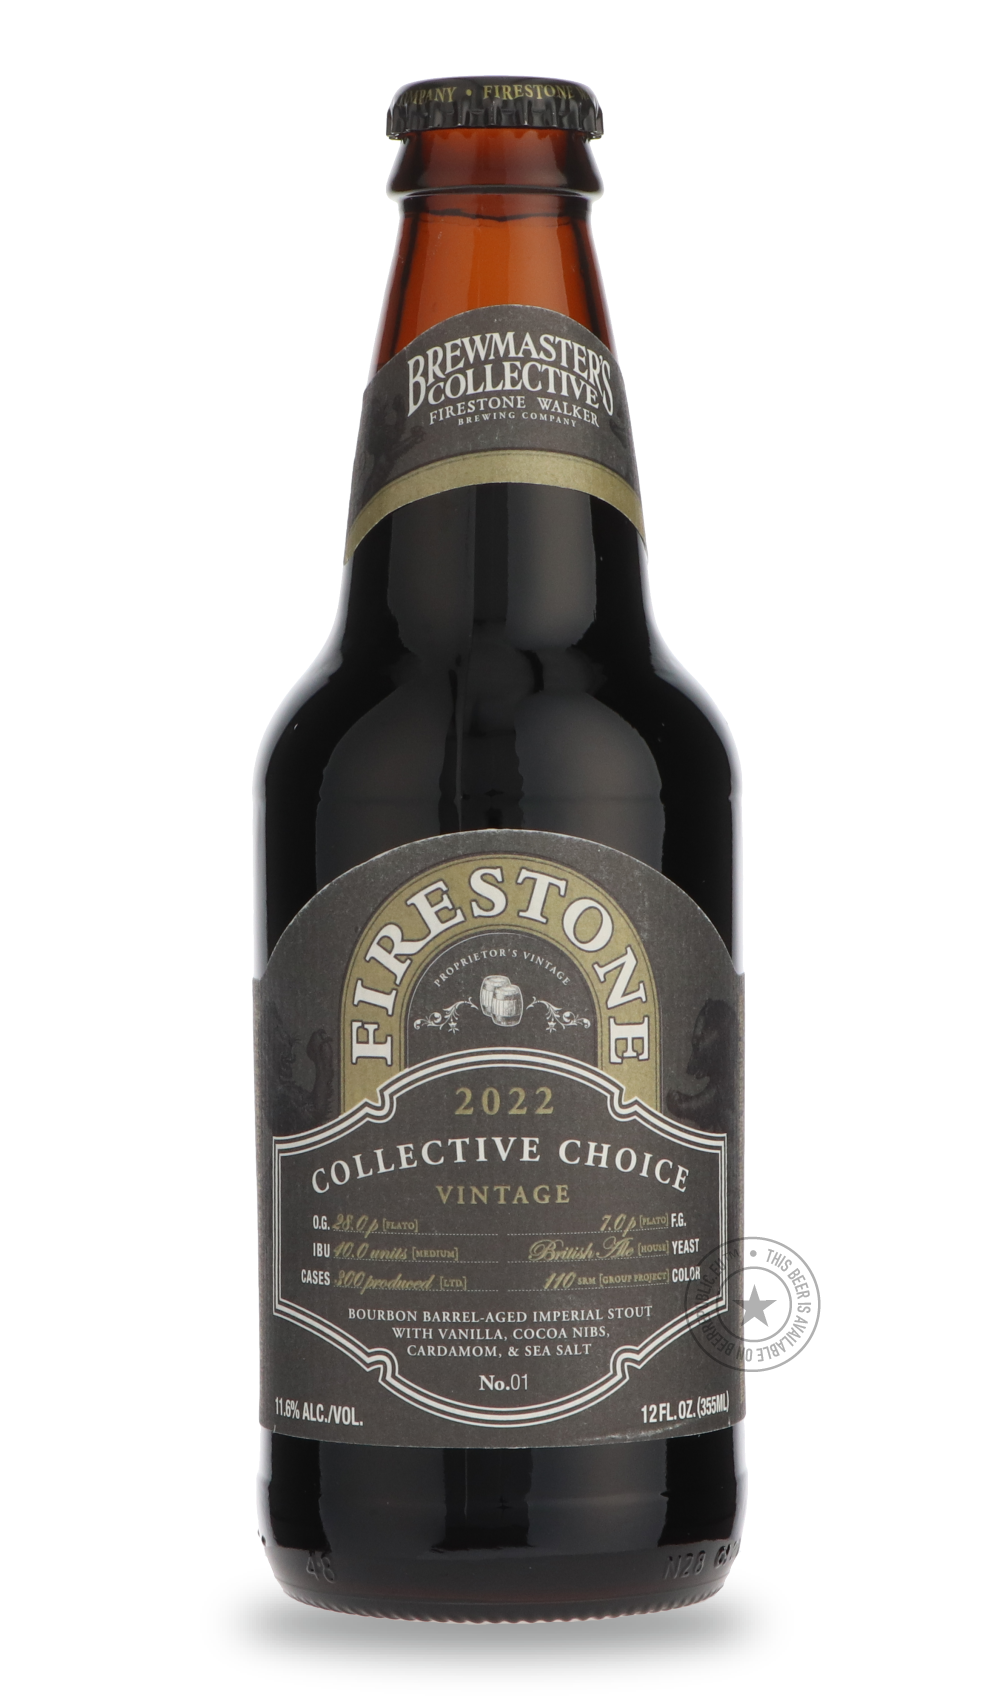 -Firestone Walker- Collective Choice-Stout & Porter- Only @ Beer Republic - The best online beer store for American & Canadian craft beer - Buy beer online from the USA and Canada - Bier online kopen - Amerikaans bier kopen - Craft beer store - Craft beer kopen - Amerikanisch bier kaufen - Bier online kaufen - Acheter biere online - IPA - Stout - Porter - New England IPA - Hazy IPA - Imperial Stout - Barrel Aged - Barrel Aged Imperial Stout - Brown - Dark beer - Blond - Blonde - Pilsner - Lager - Wheat - We